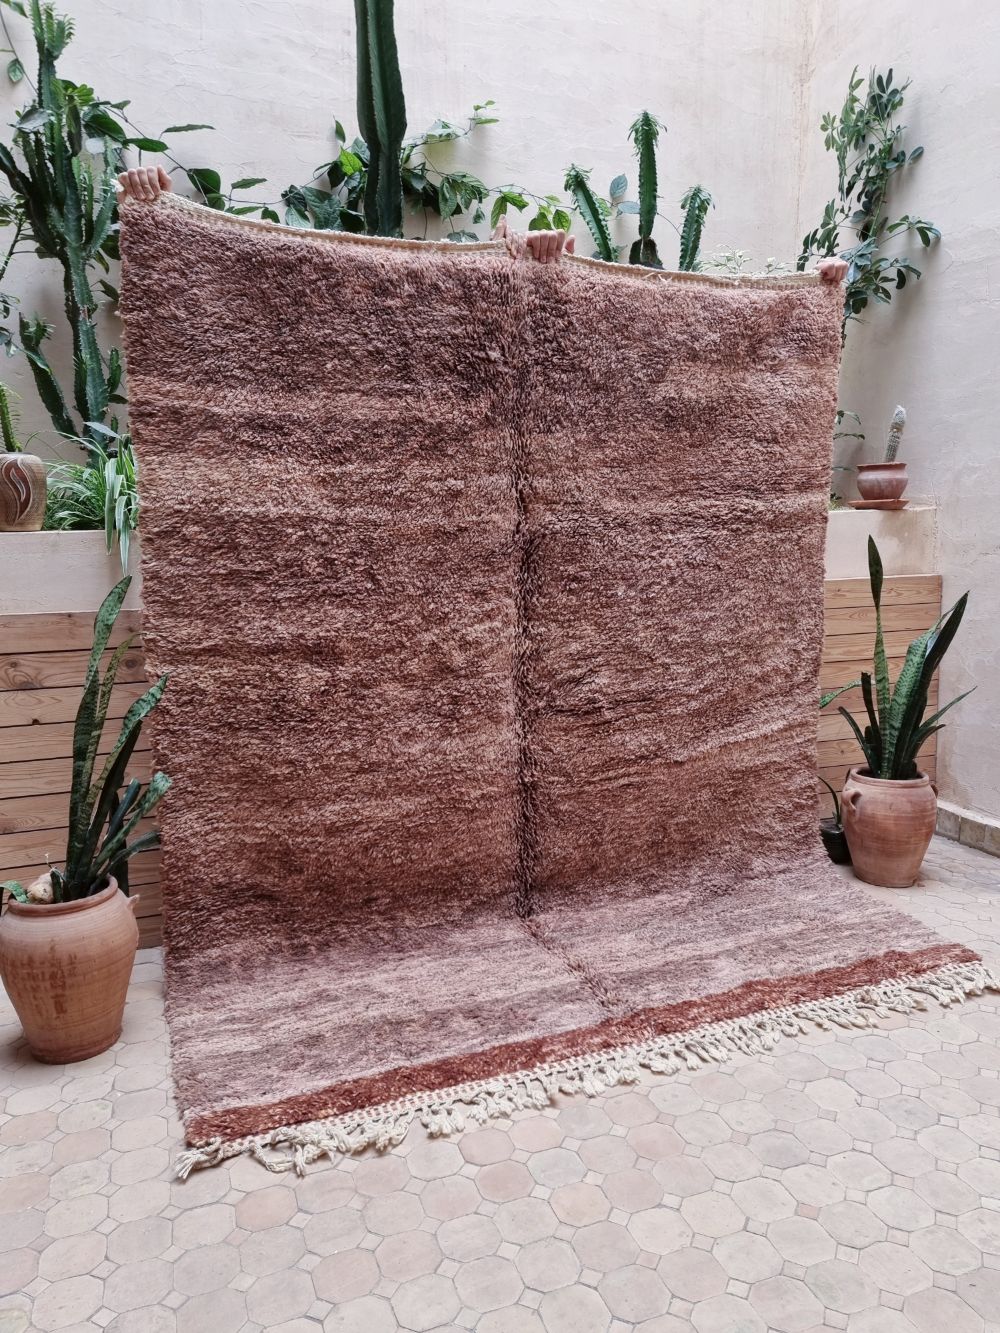 Moroccan Grizzly Bear rug 240x160cm